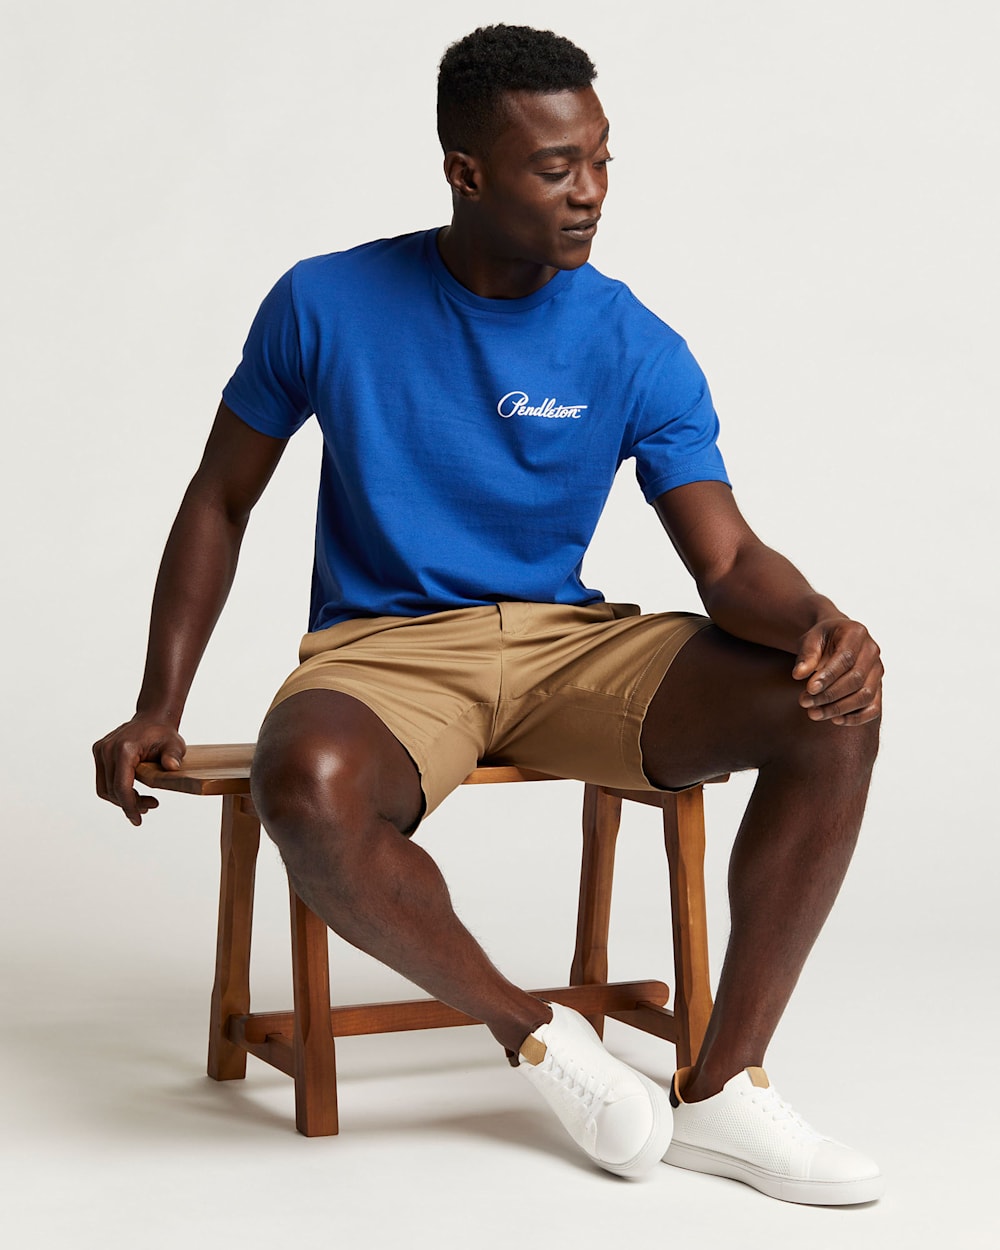 ALTERNATE VIEW OF MEN'S BASE CAMP GRAPHIC TEE IN ROYAL/WHITE image number 5